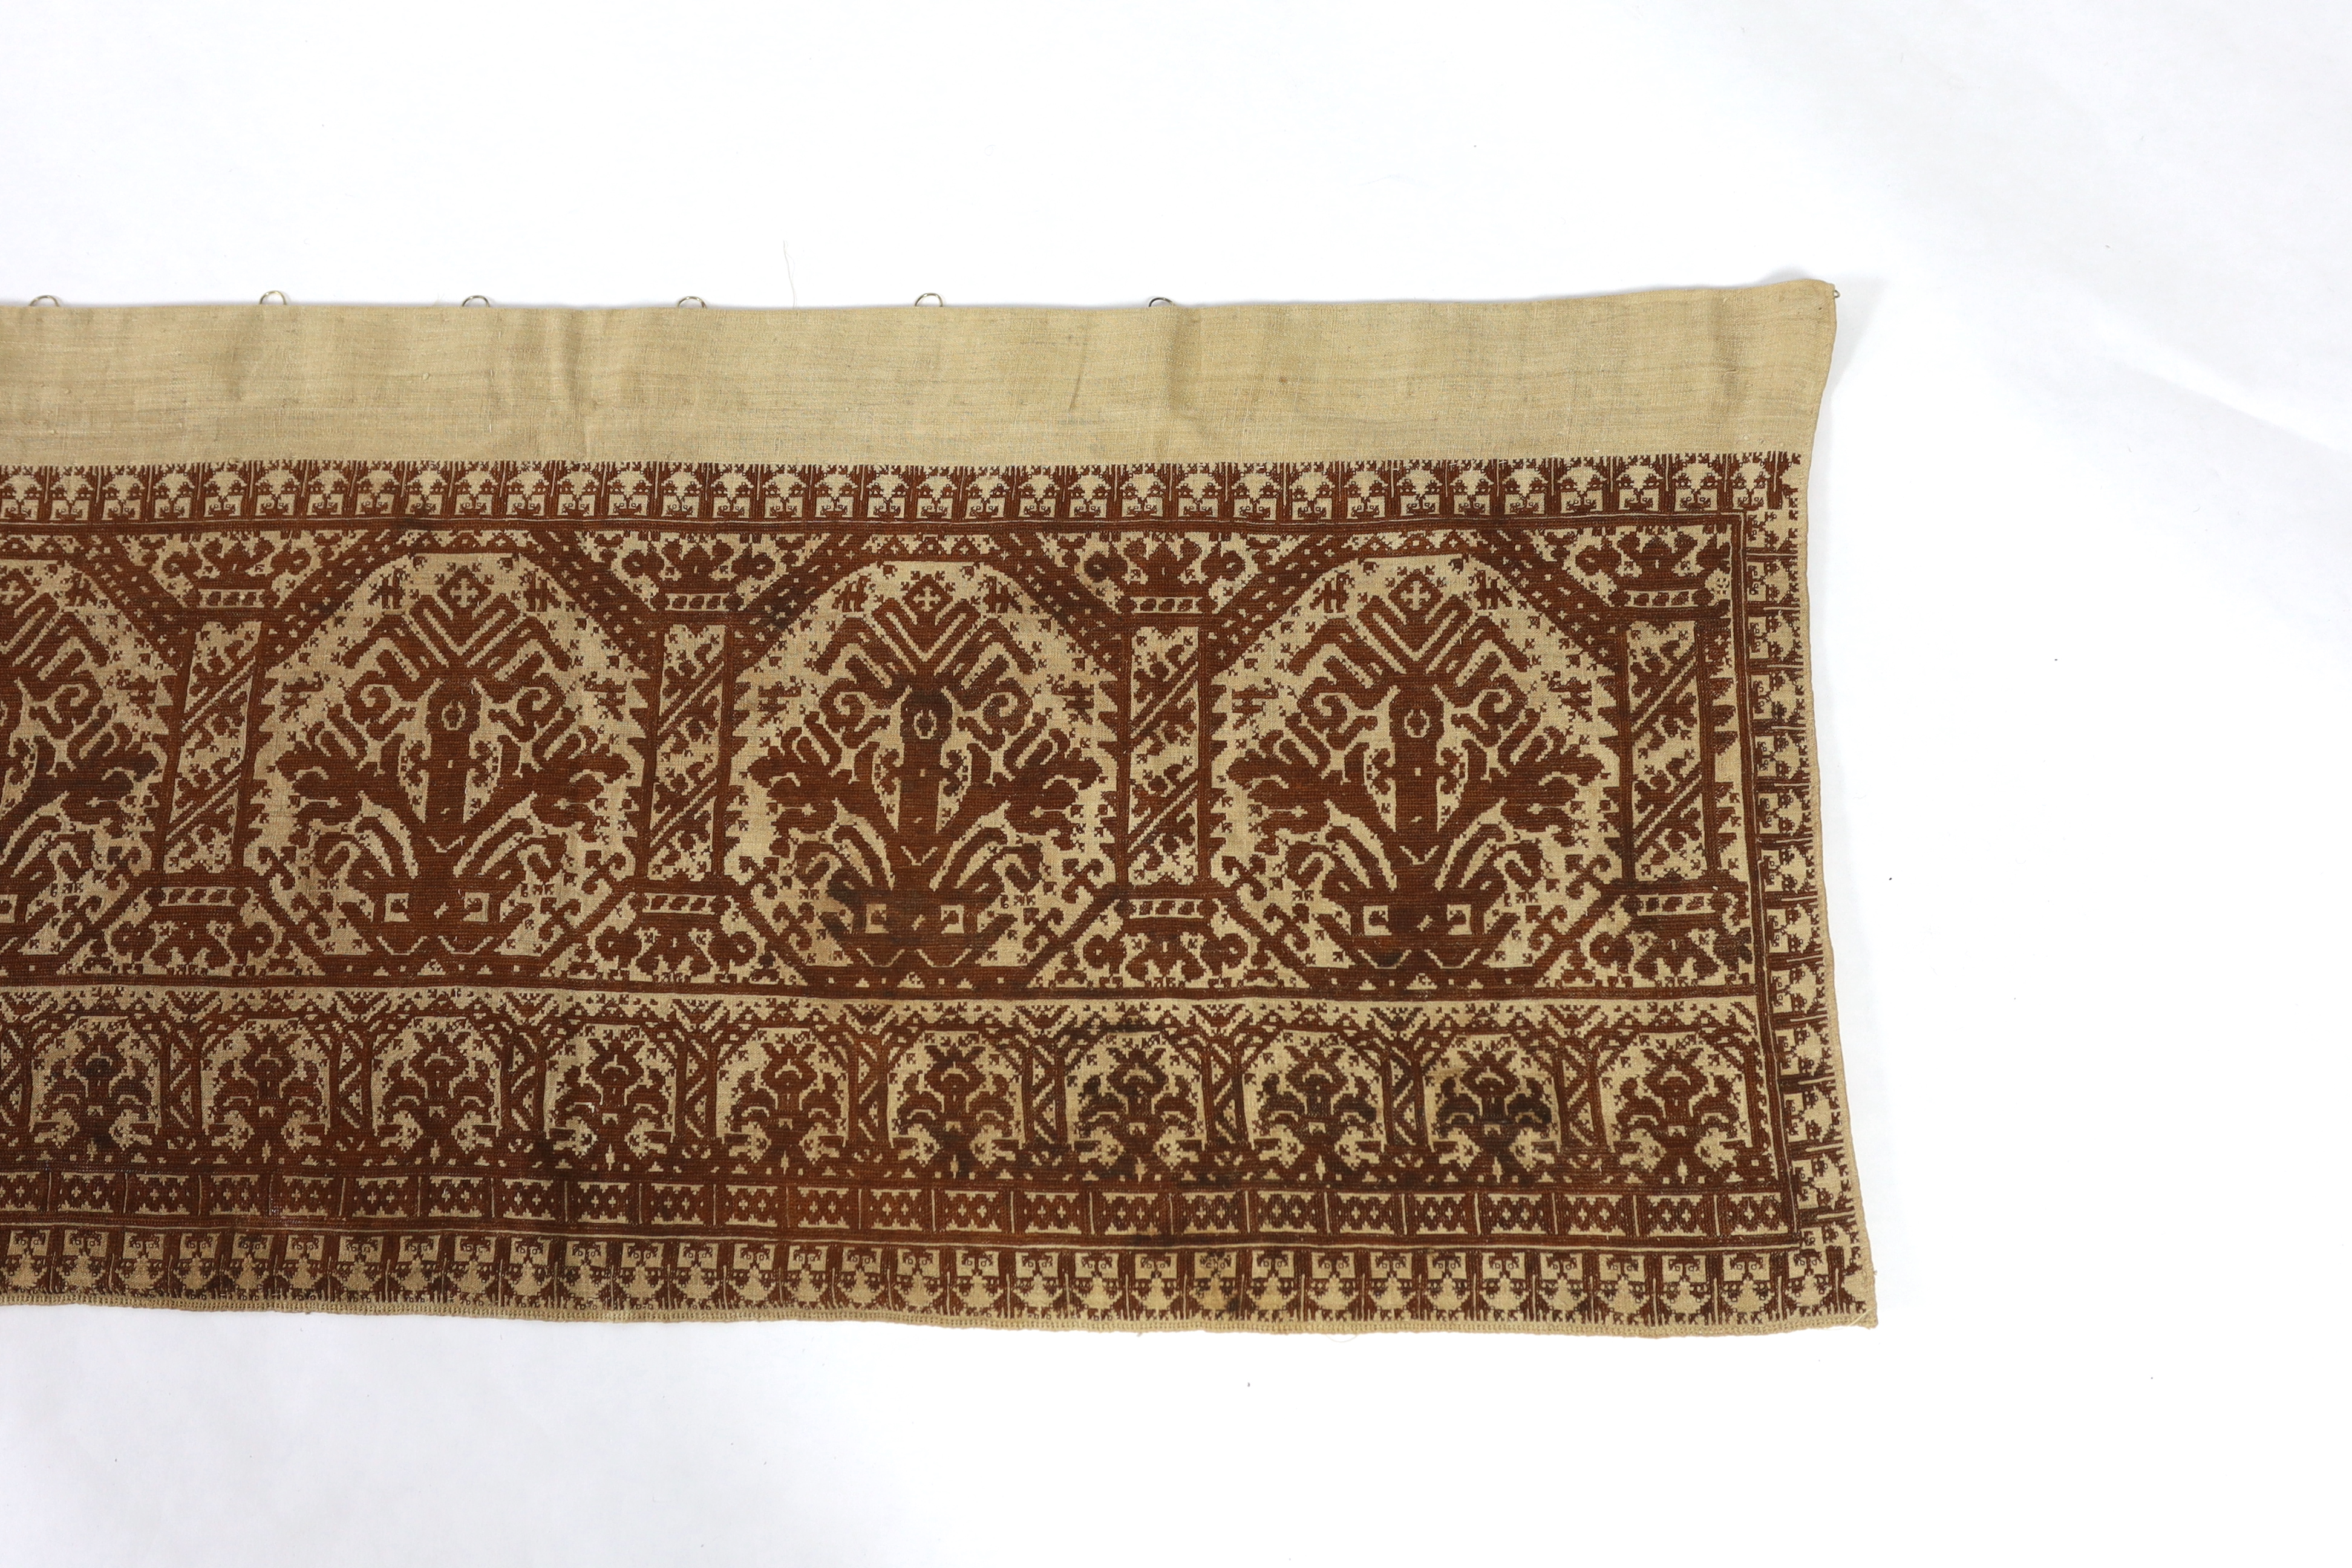 An early 19th century long Greek Islands cross stitch pelmet (hanging), embroidered on coarse linen with brown silk, using cross stitch, designed in horizontal rows of similar symbols, the lower row being a smaller size,